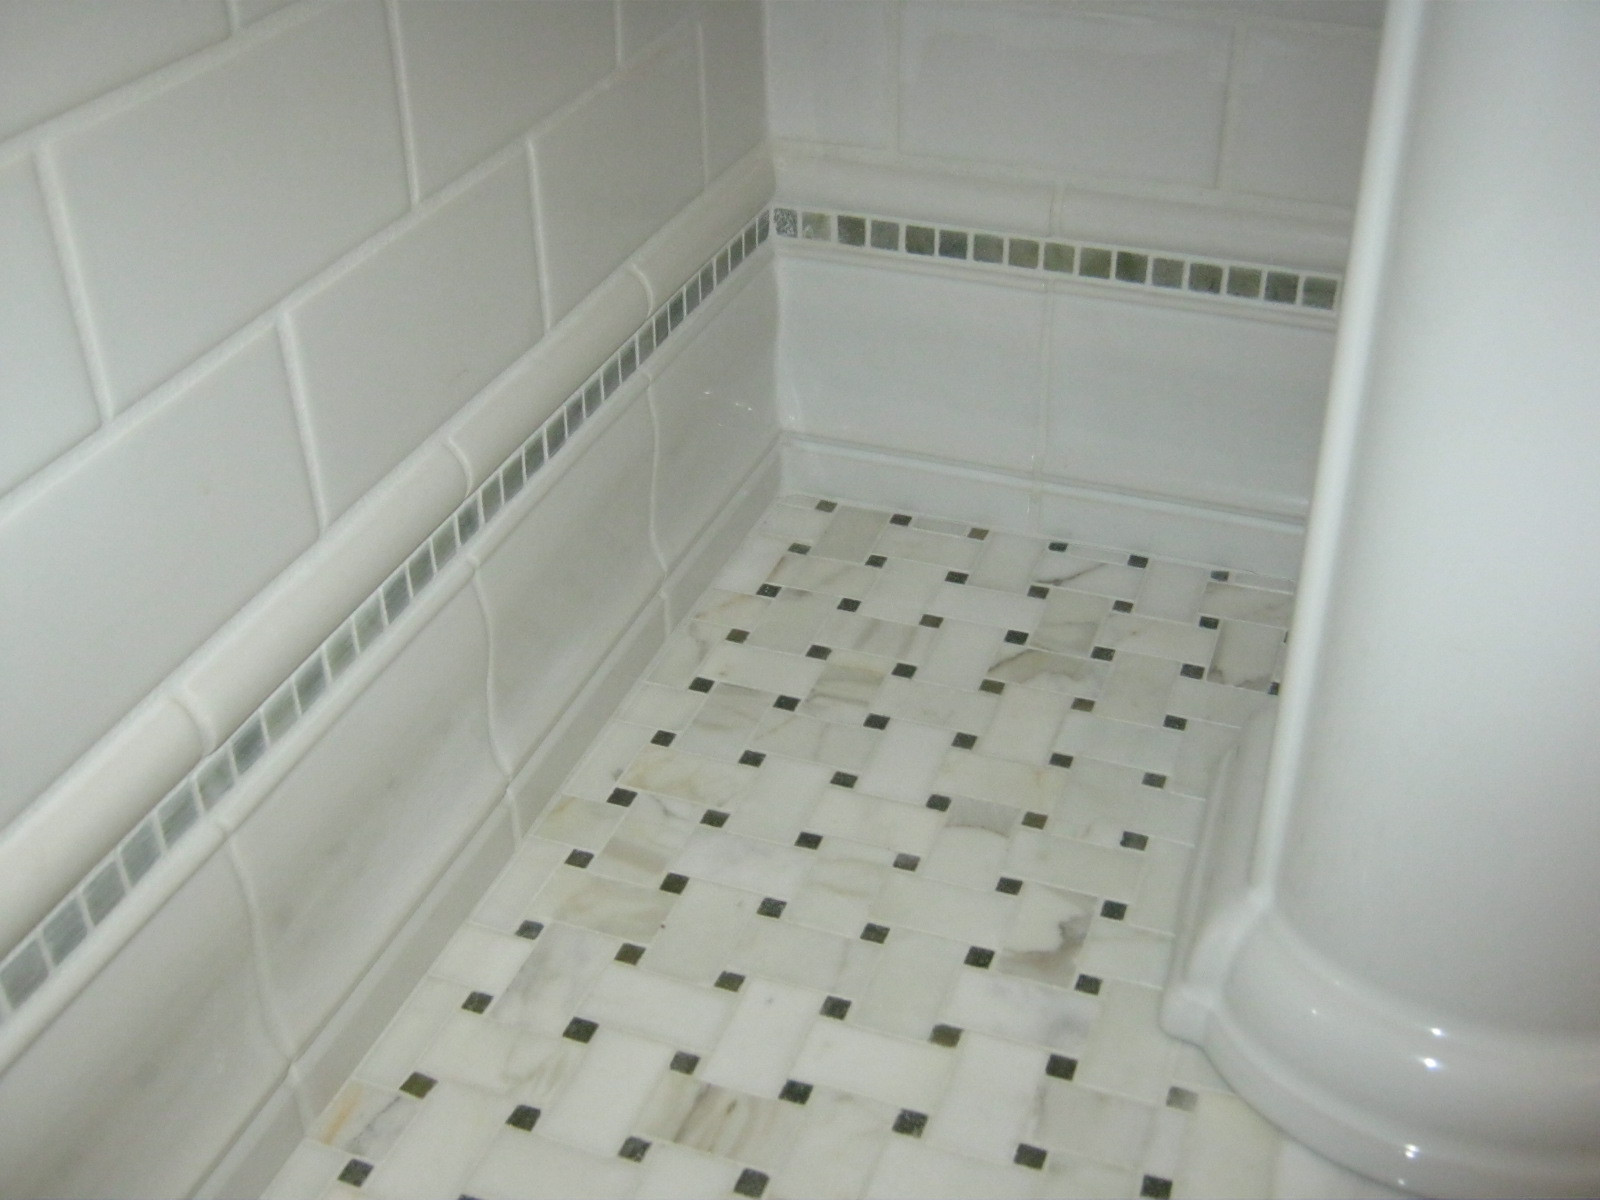 Tile Baseboard In Bathroom
 Ideas Tile Baseboard For Satisfy The Most Exquisite